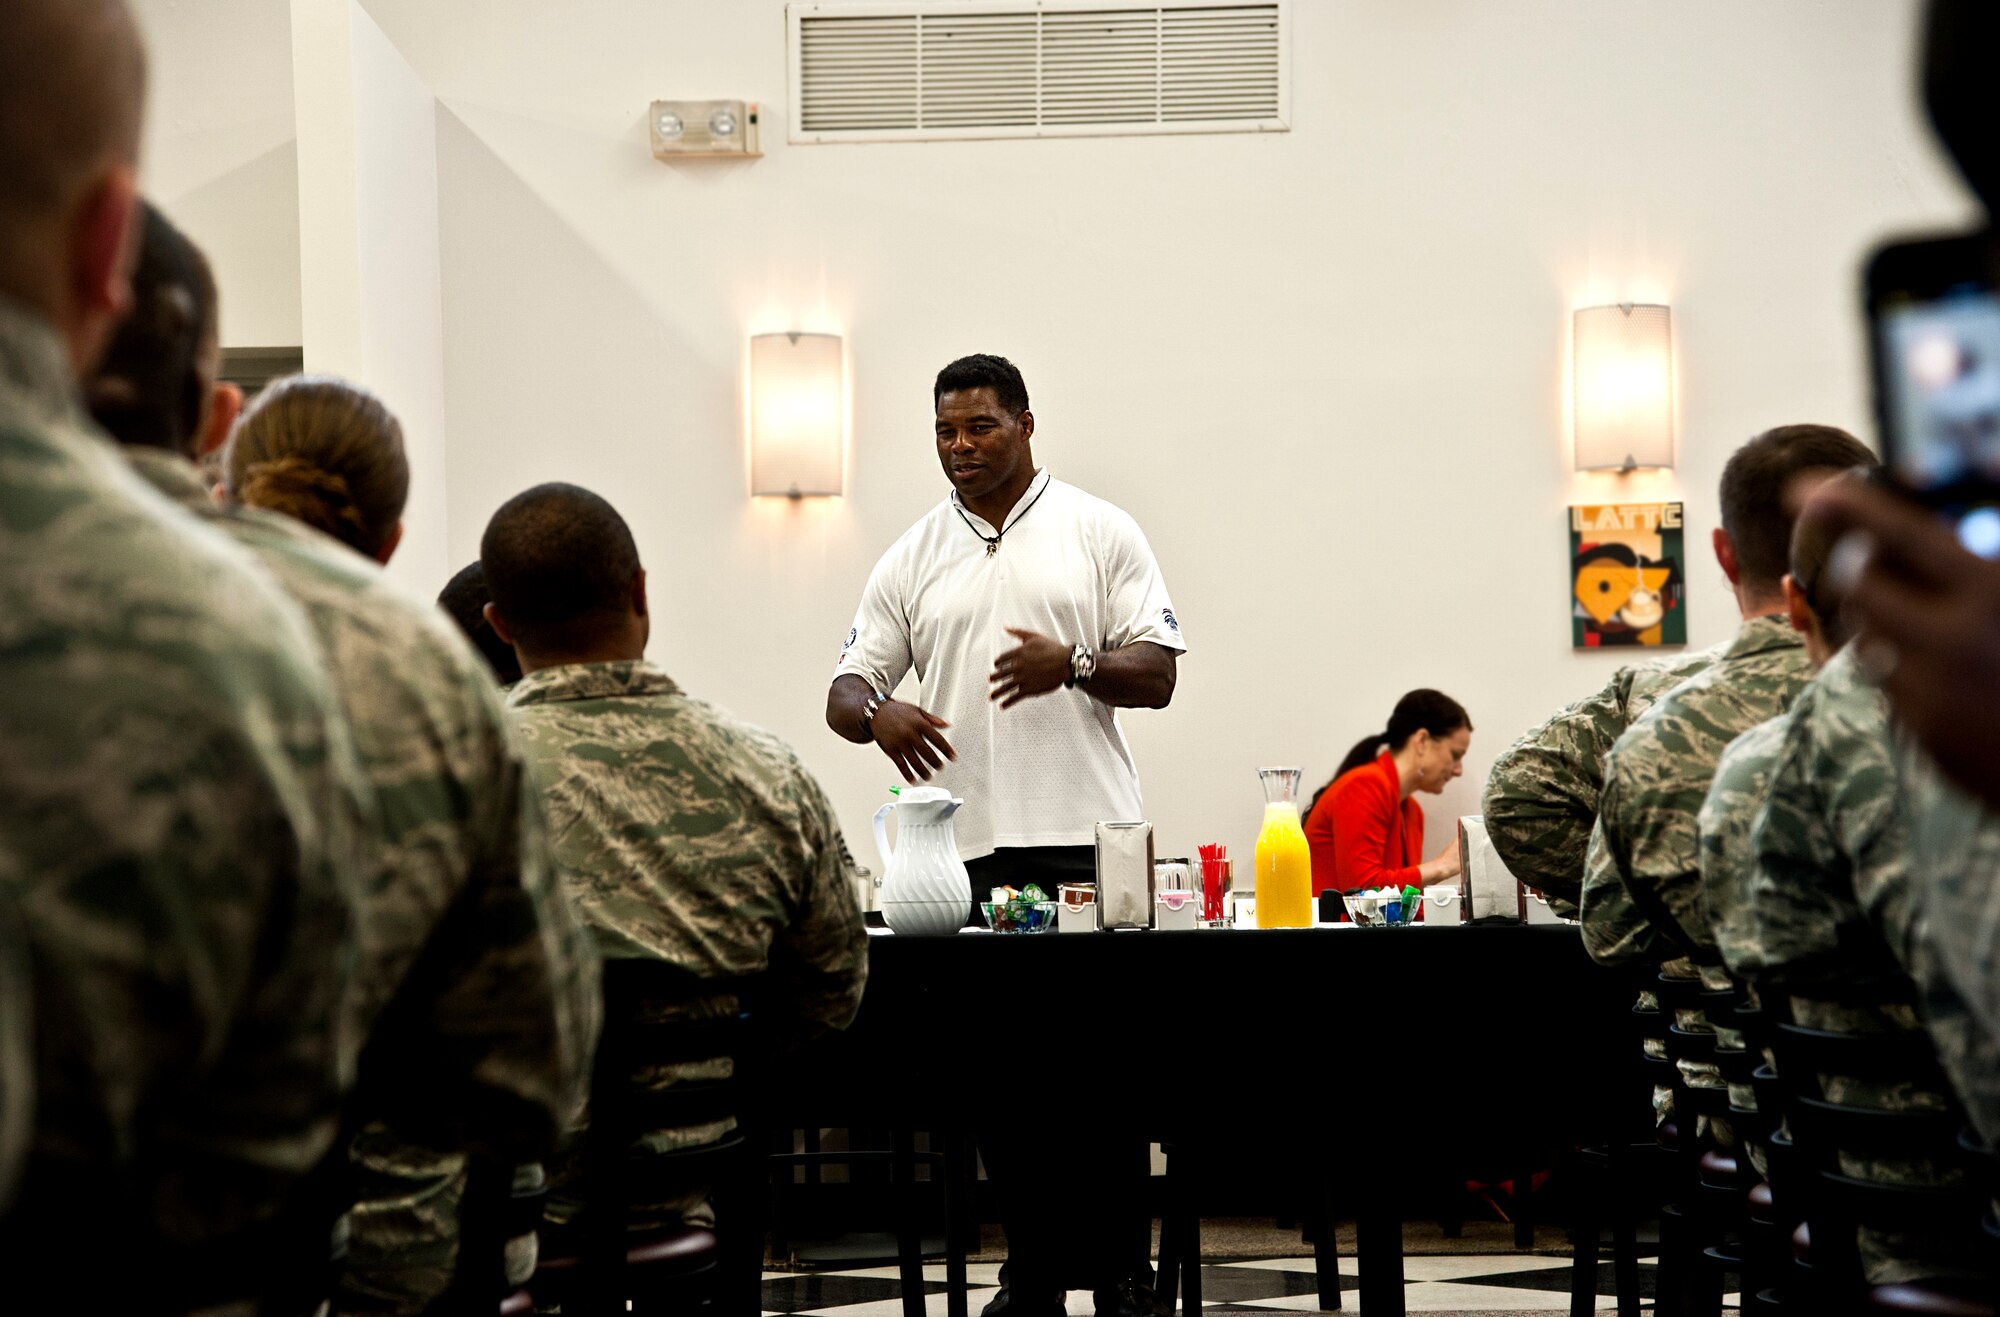 Herschel Walker shares his story with Airmen from Team Whiteman during a breakfast May 21, 2014, at Whiteman Air Force Base, Missouri. Walker is a former NFL star and “Celebrity Apprentice” contestant. (U.S. Air Force photo by Senior Airman Daniel Phelps/Released)